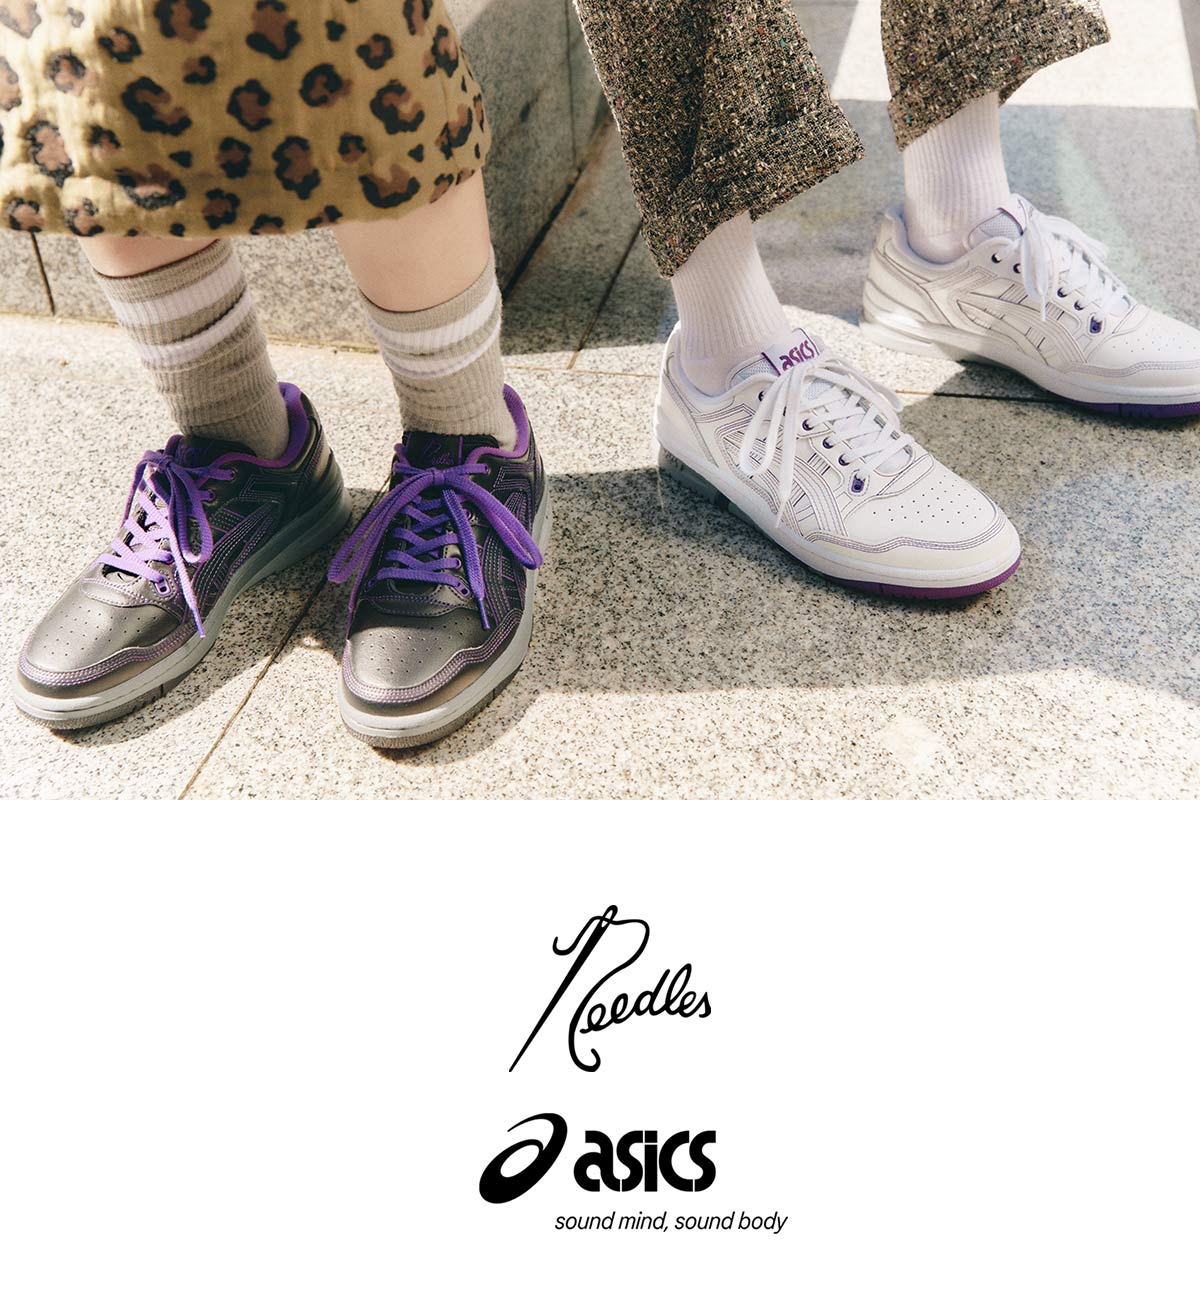 〈NEEDLES〉x〈ASICS〉COLLABORATION PRODUCTS